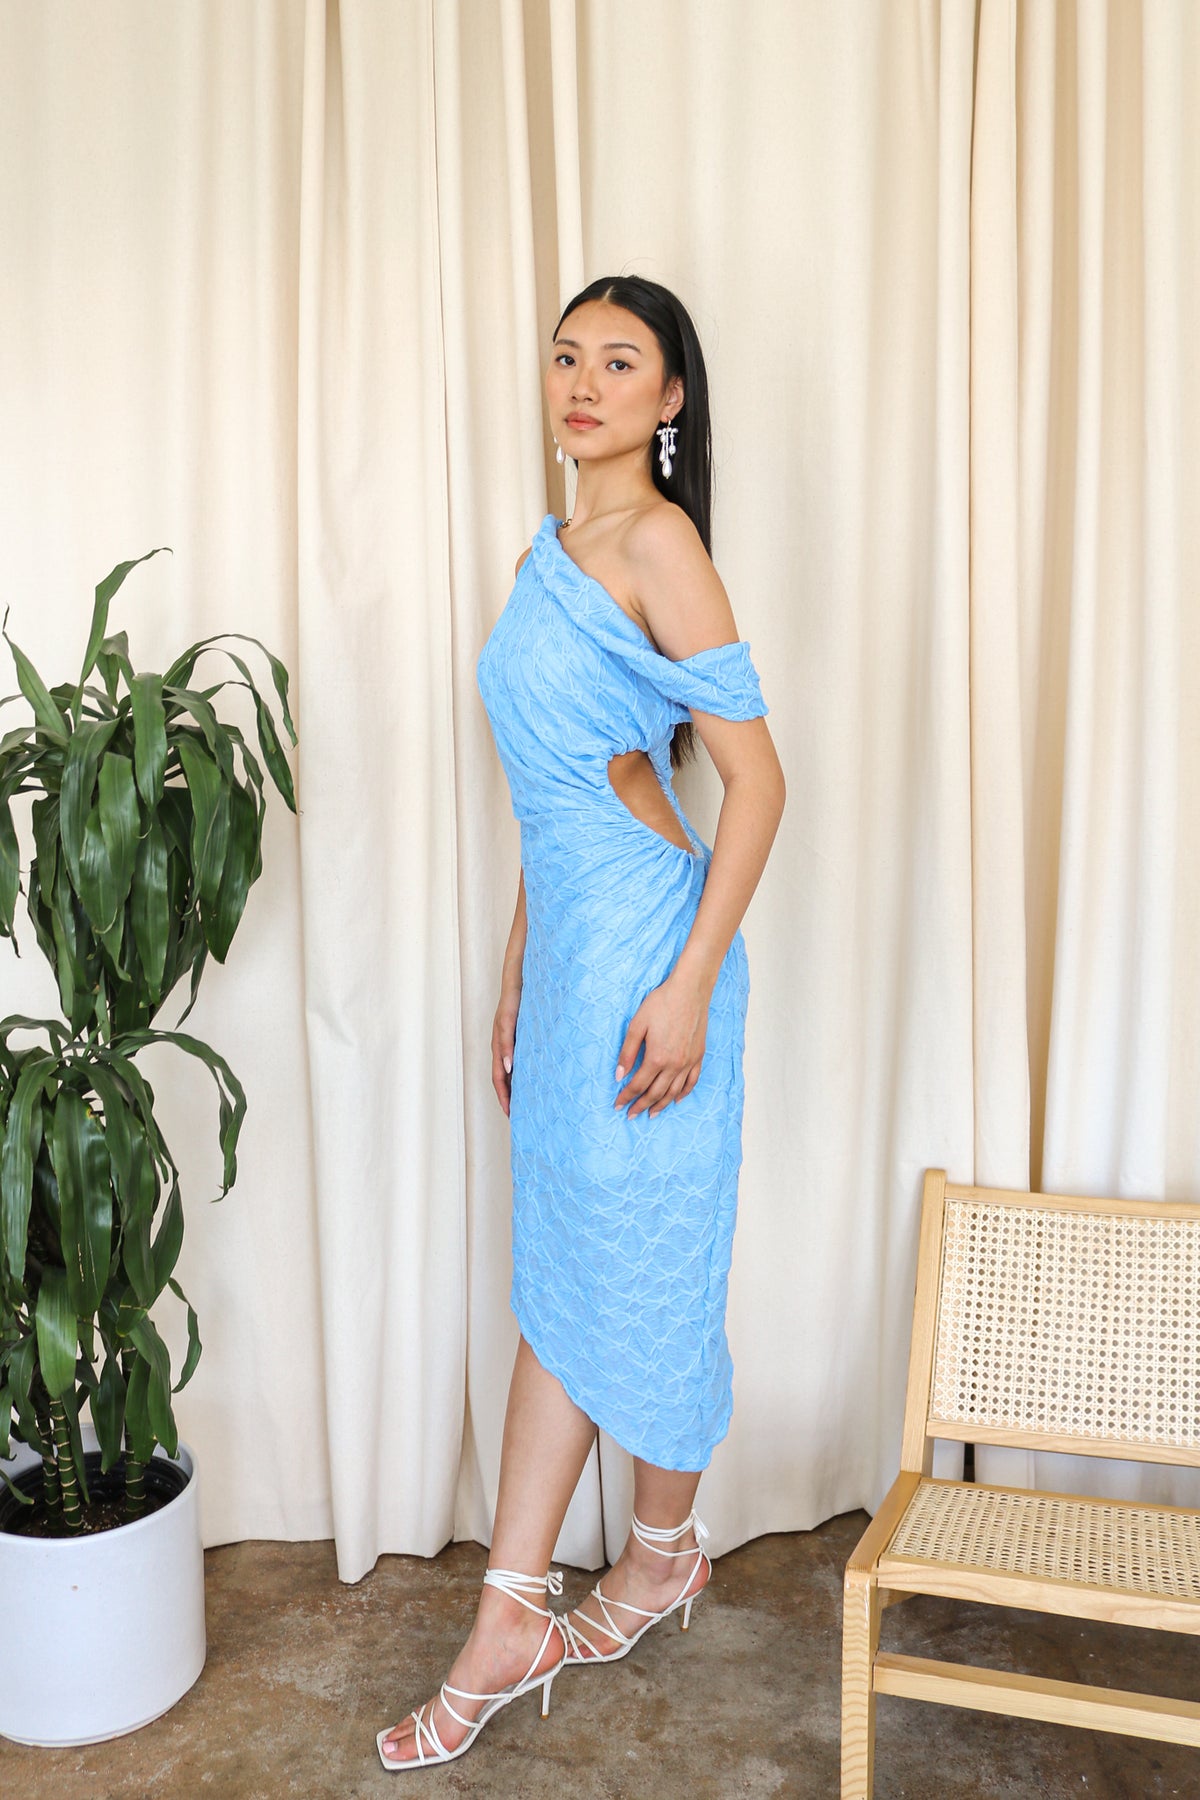 Model wearing a cerulean blue one-shoulder textured midi dress, standing beside a plant and a white cushioned chair.